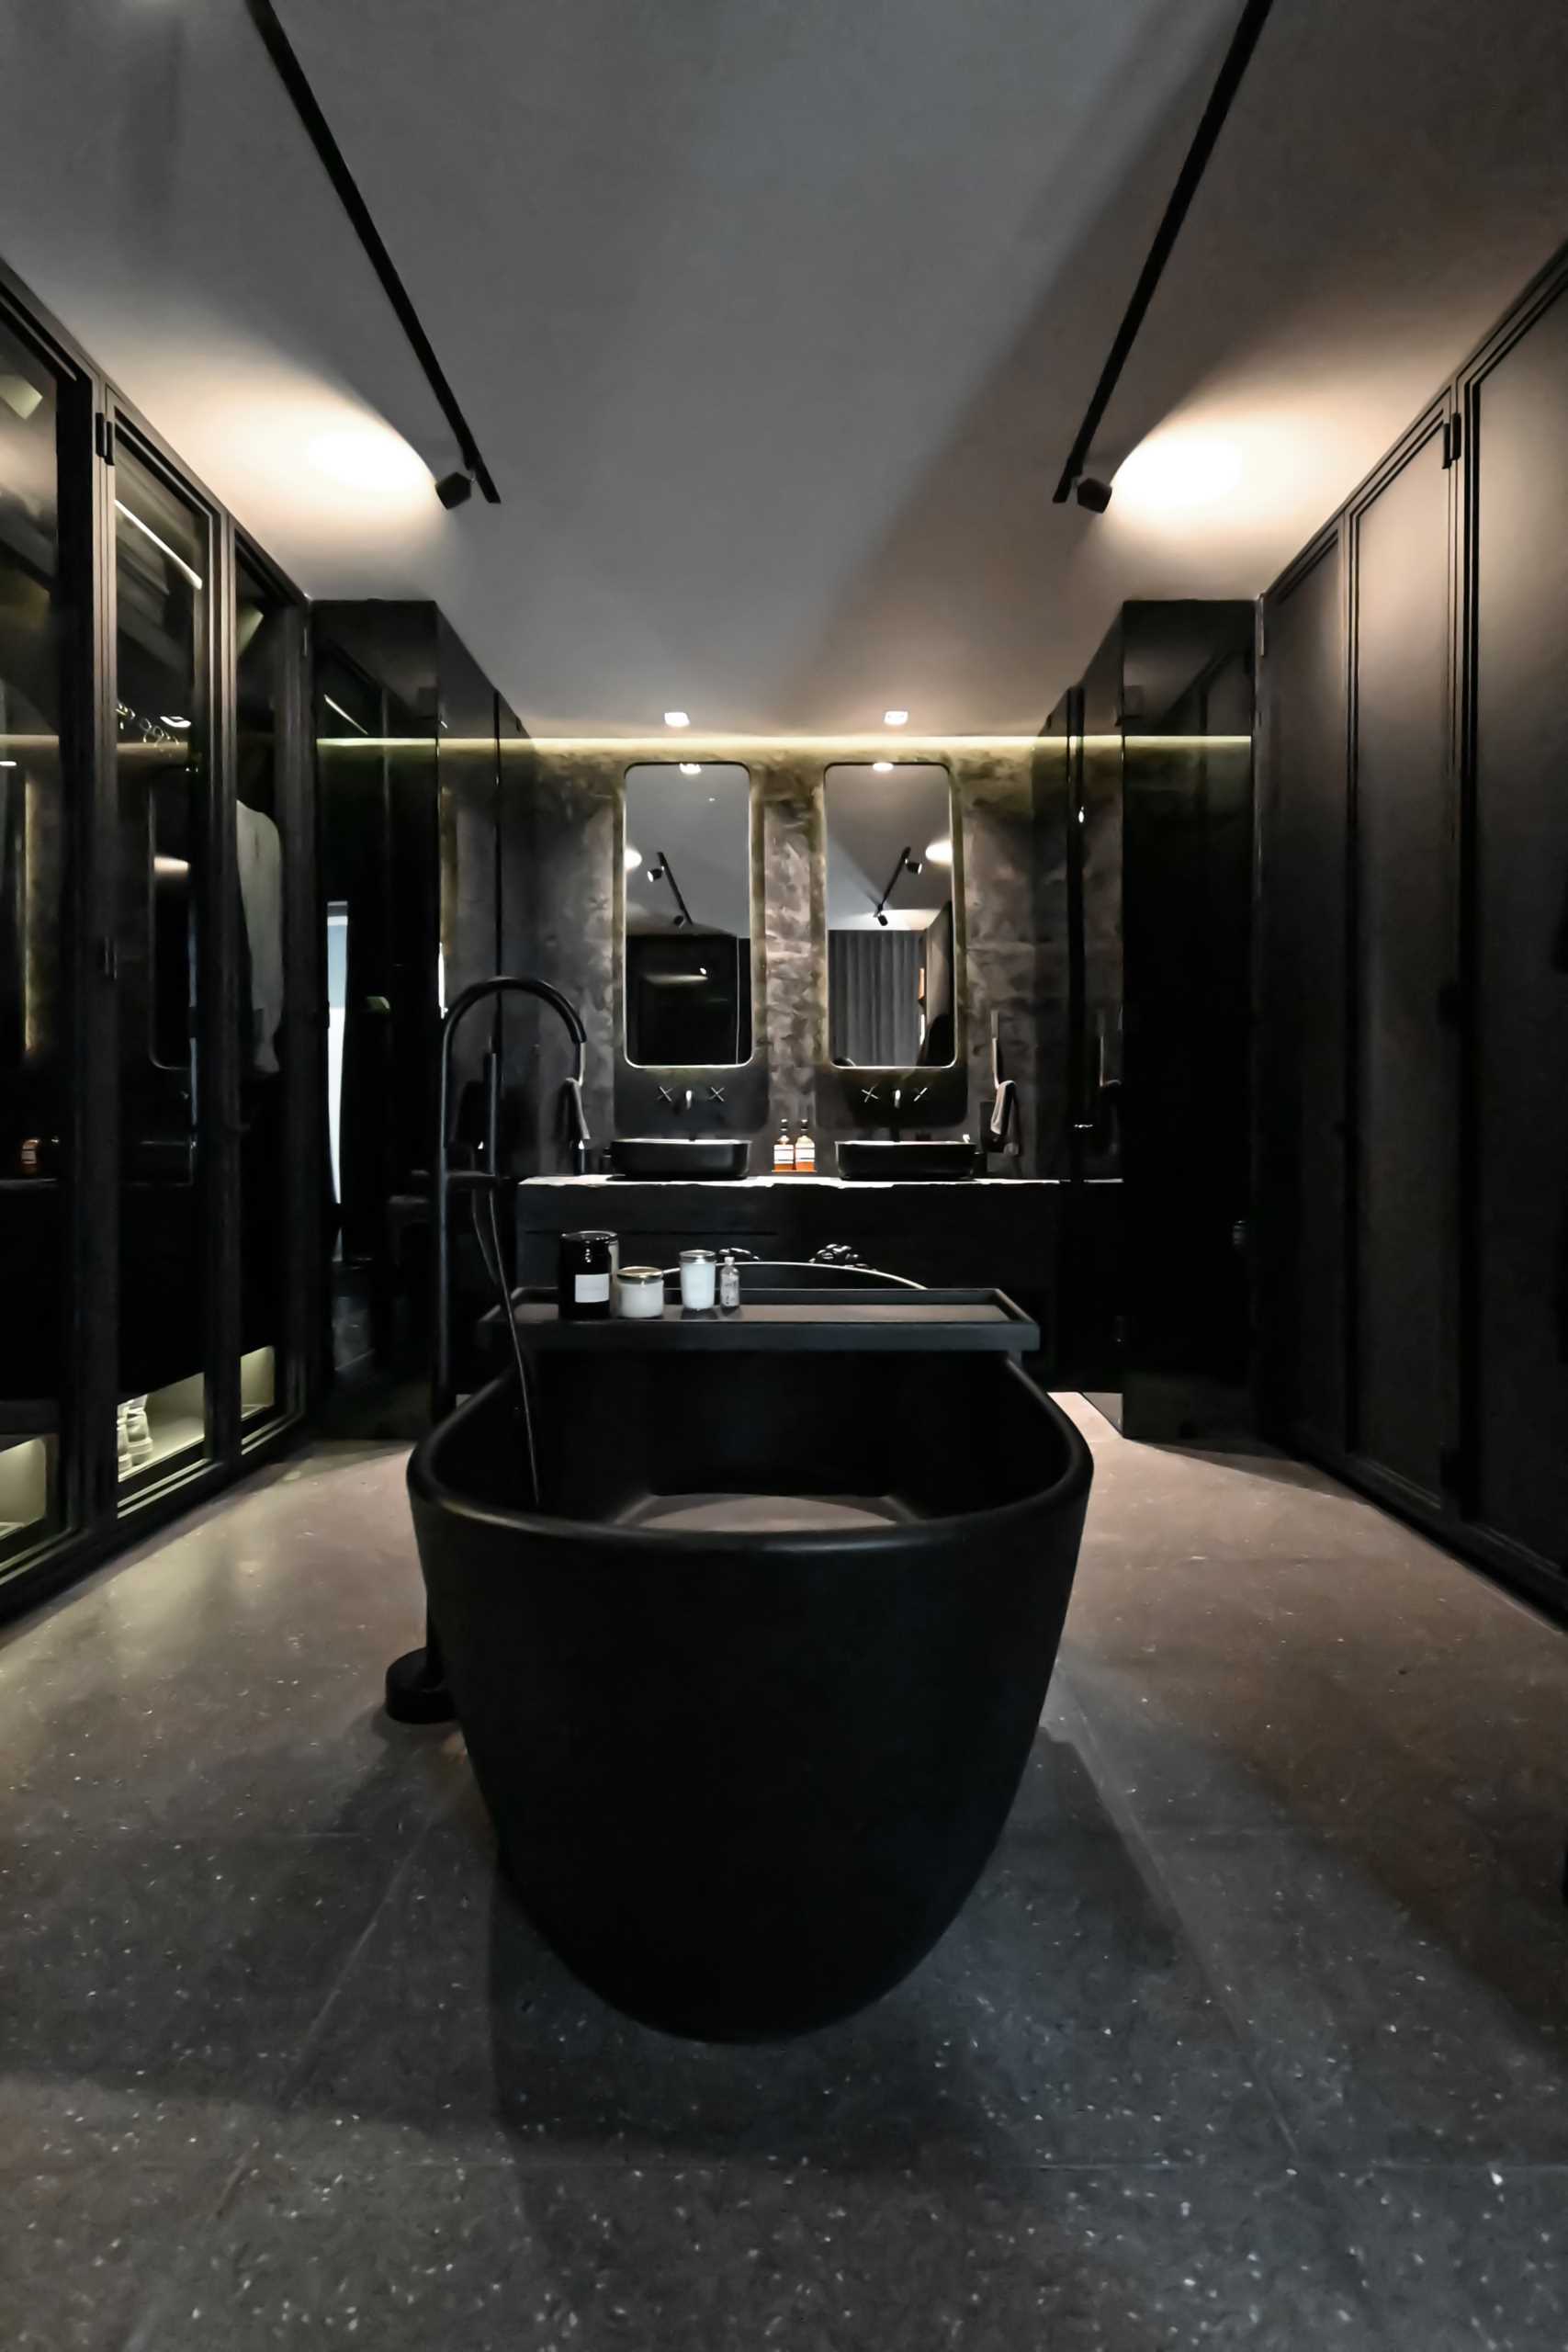 A modern black bathroom includes a freestanding black bathtub in the center of the room, a wall of glass-fronted closets, and a double vanity. The toilet and shower are located behind glass boxes on either side of the vanity.